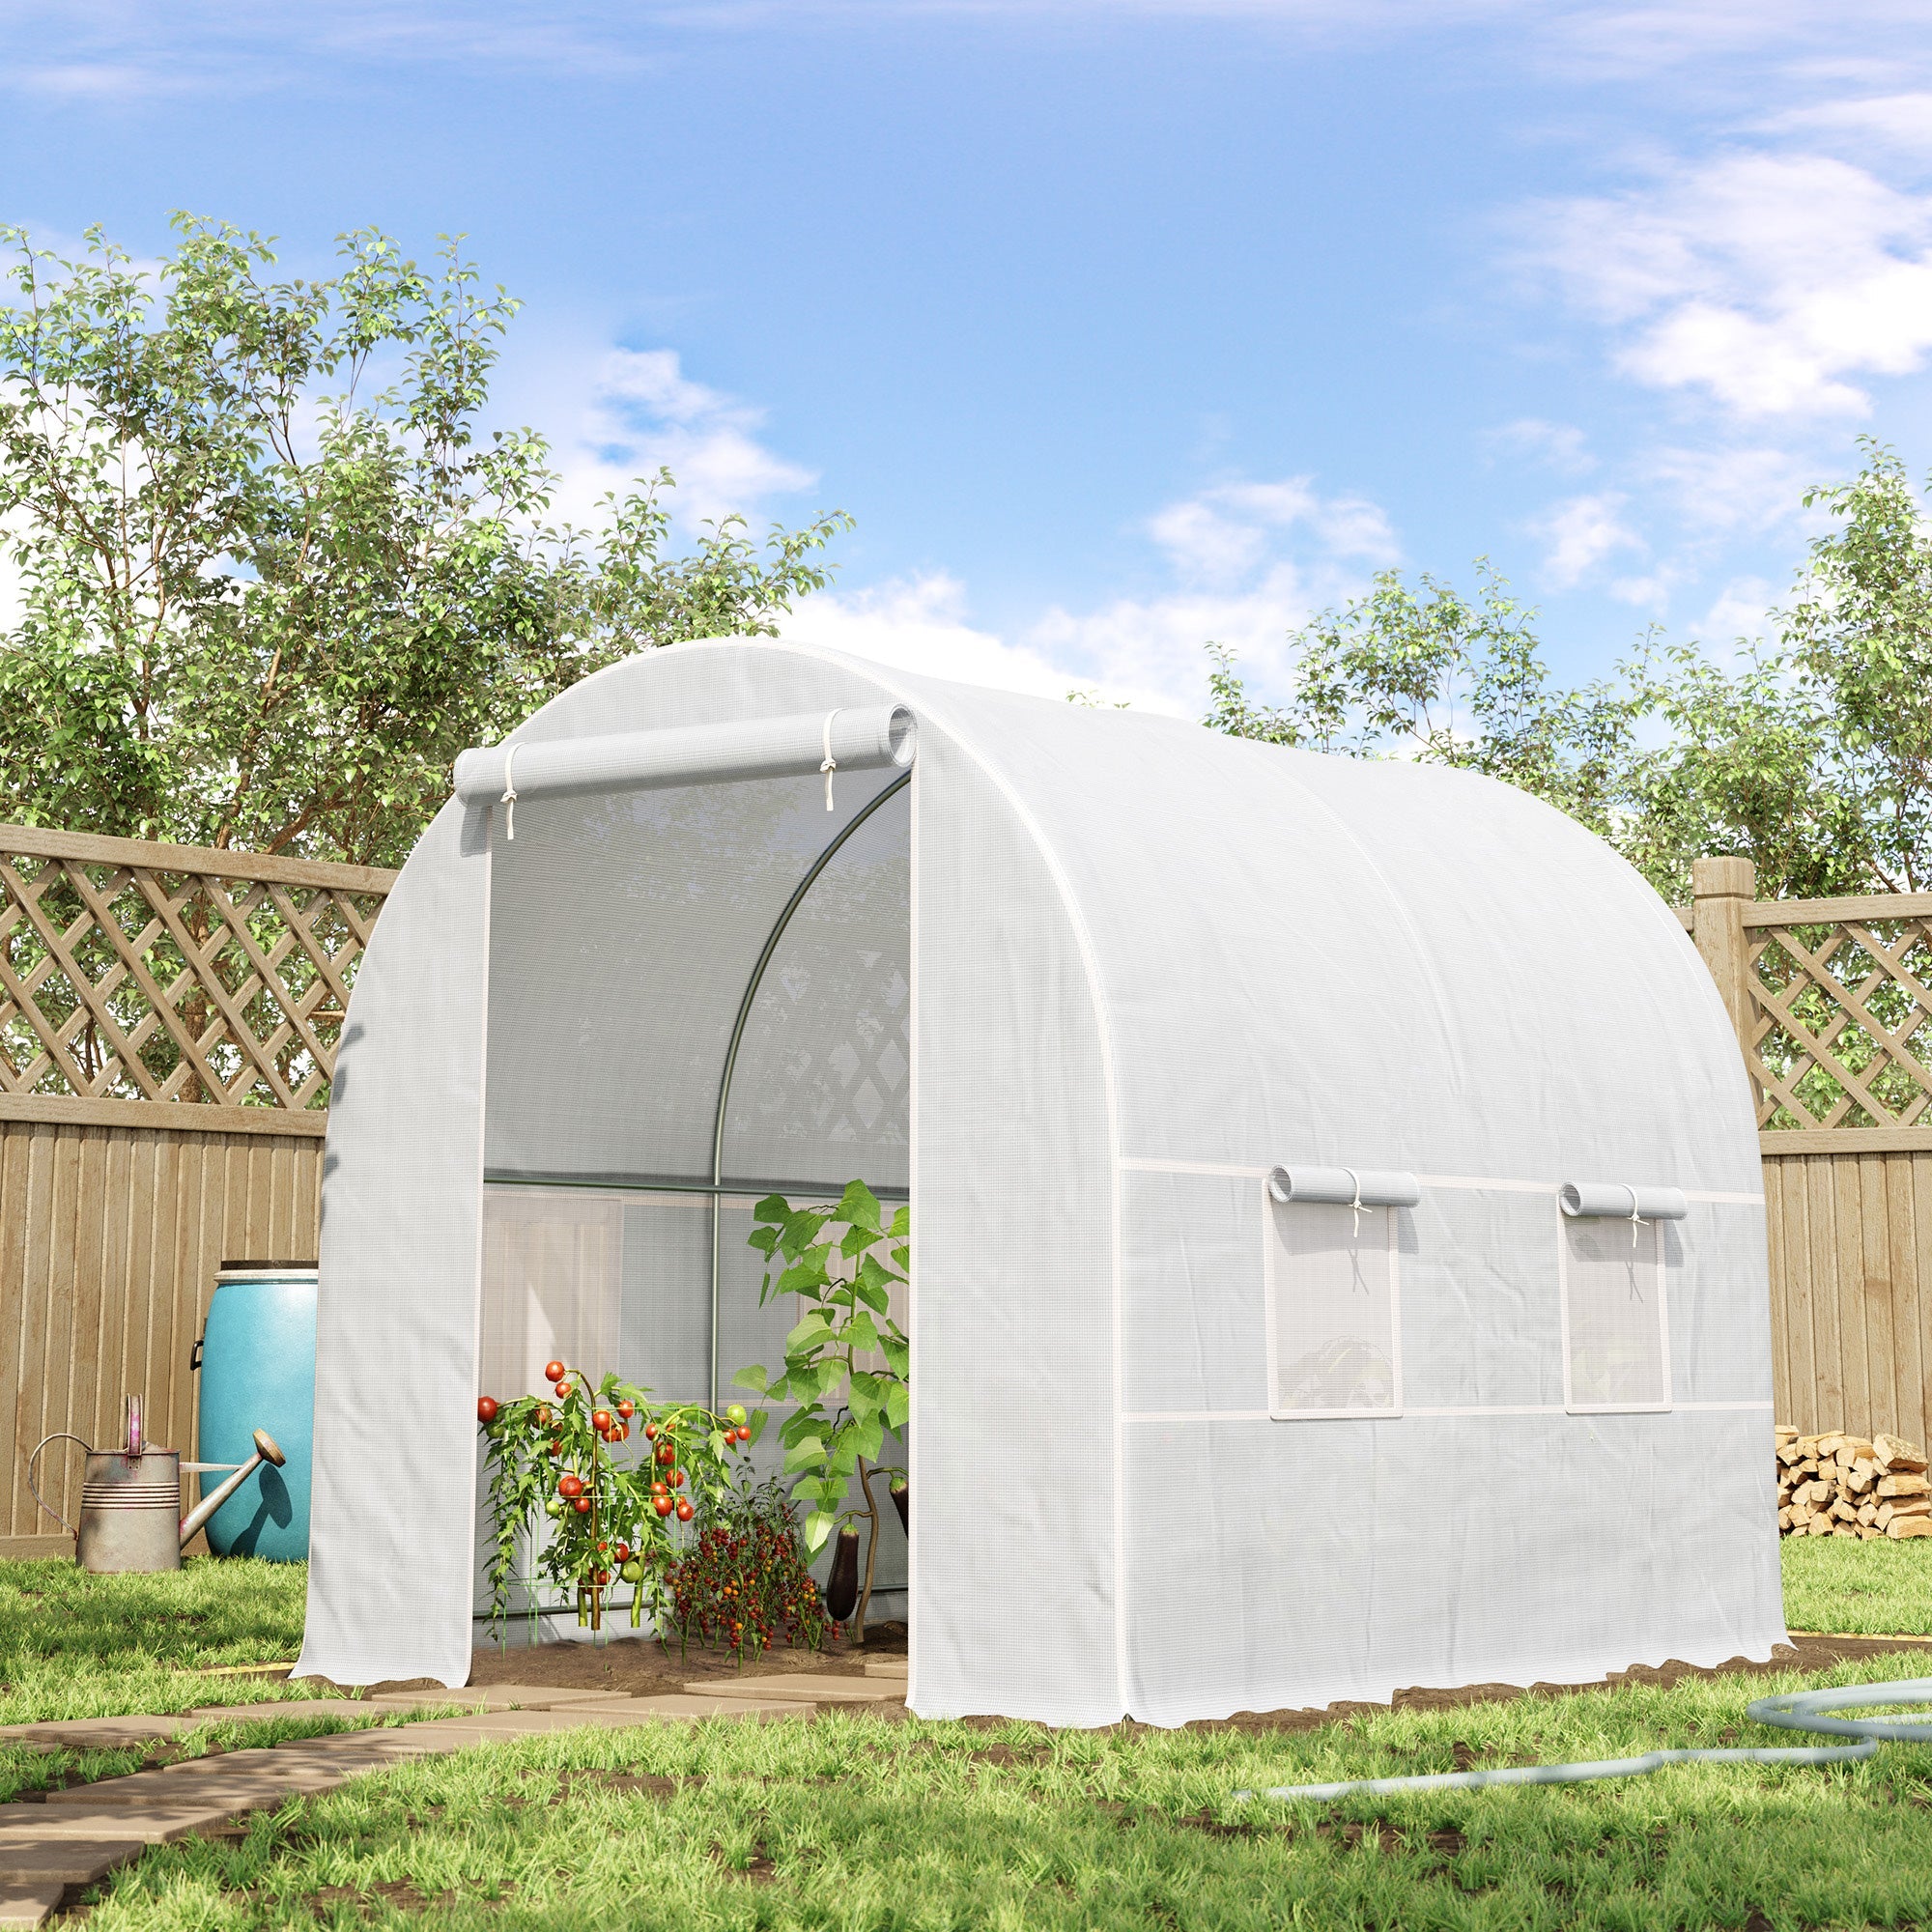 2.5 x 2 x 2 m Large Galvanized Steel Frame Outdoor Poly Tunnel Garden Walk-In Patio Greenhouse - White-1